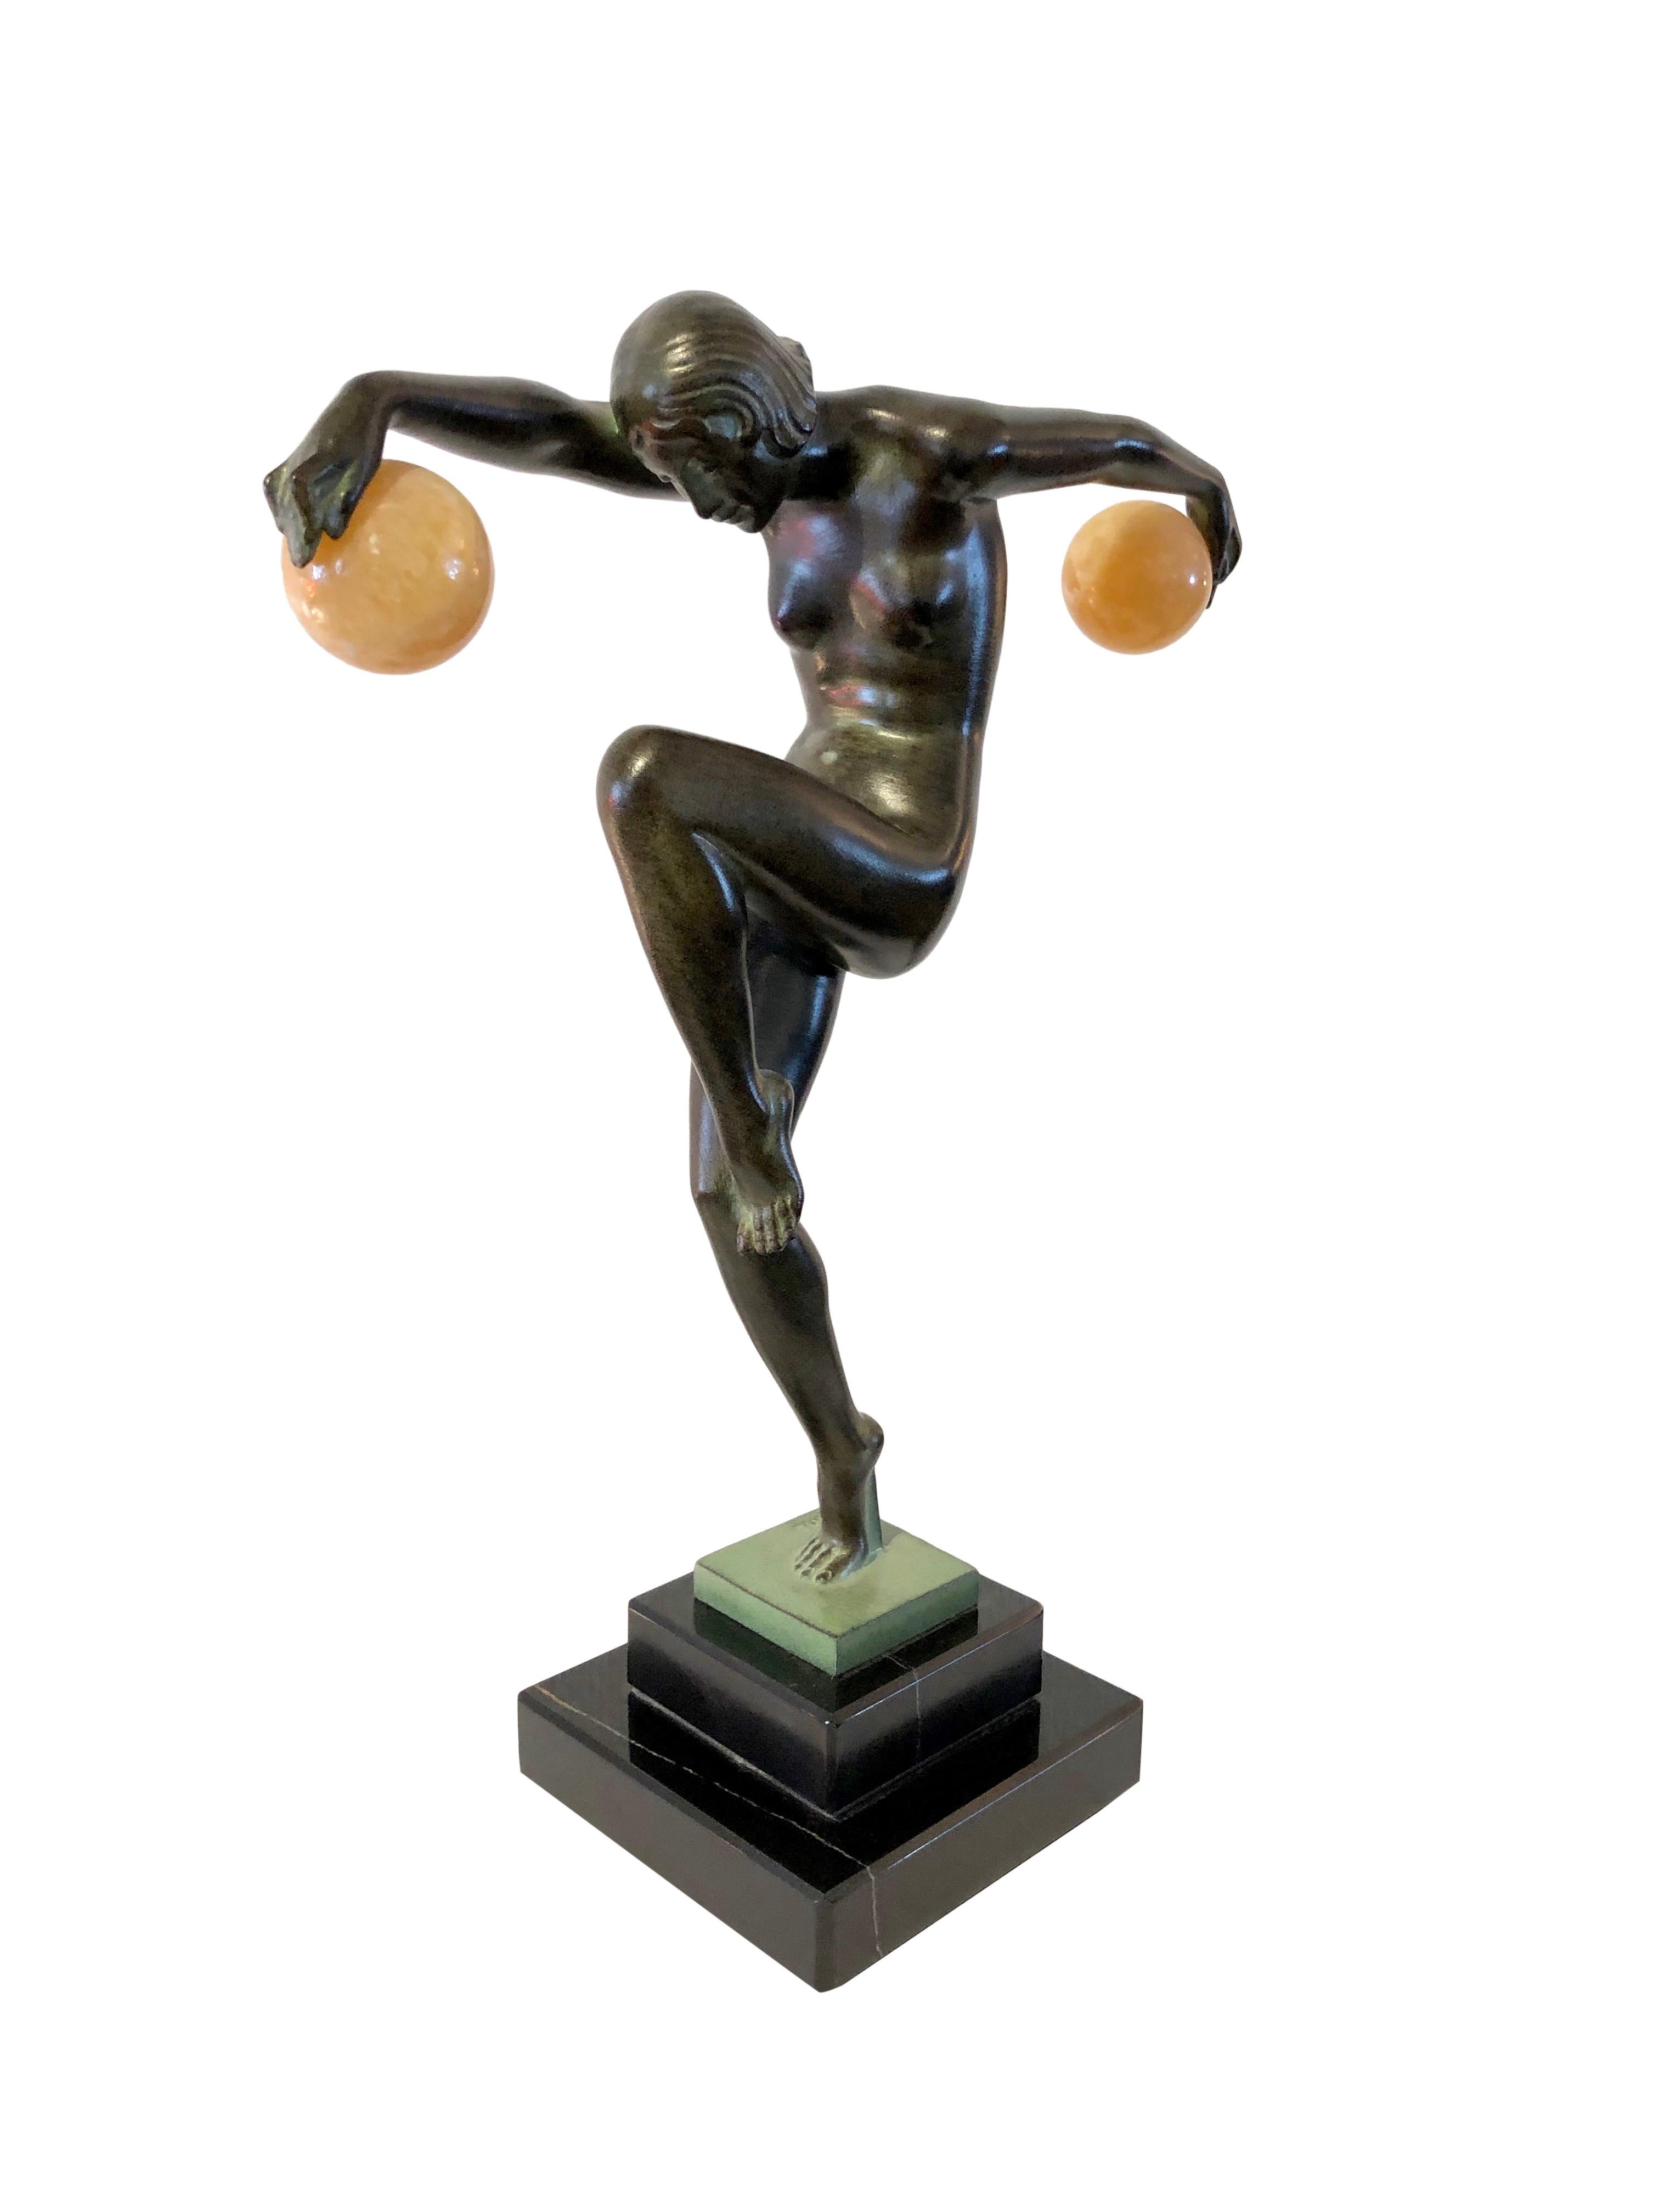 Sculpture of a dancing lady 
Danseuse Aux Boules (French: ball dancer) 

Designed in France during the roaring 1920s by “Maurice et Marcel Denis”, 
signed Original Max Le Verrier, signed 

Art Deco style, France

Material: 
Régule (Spelter)